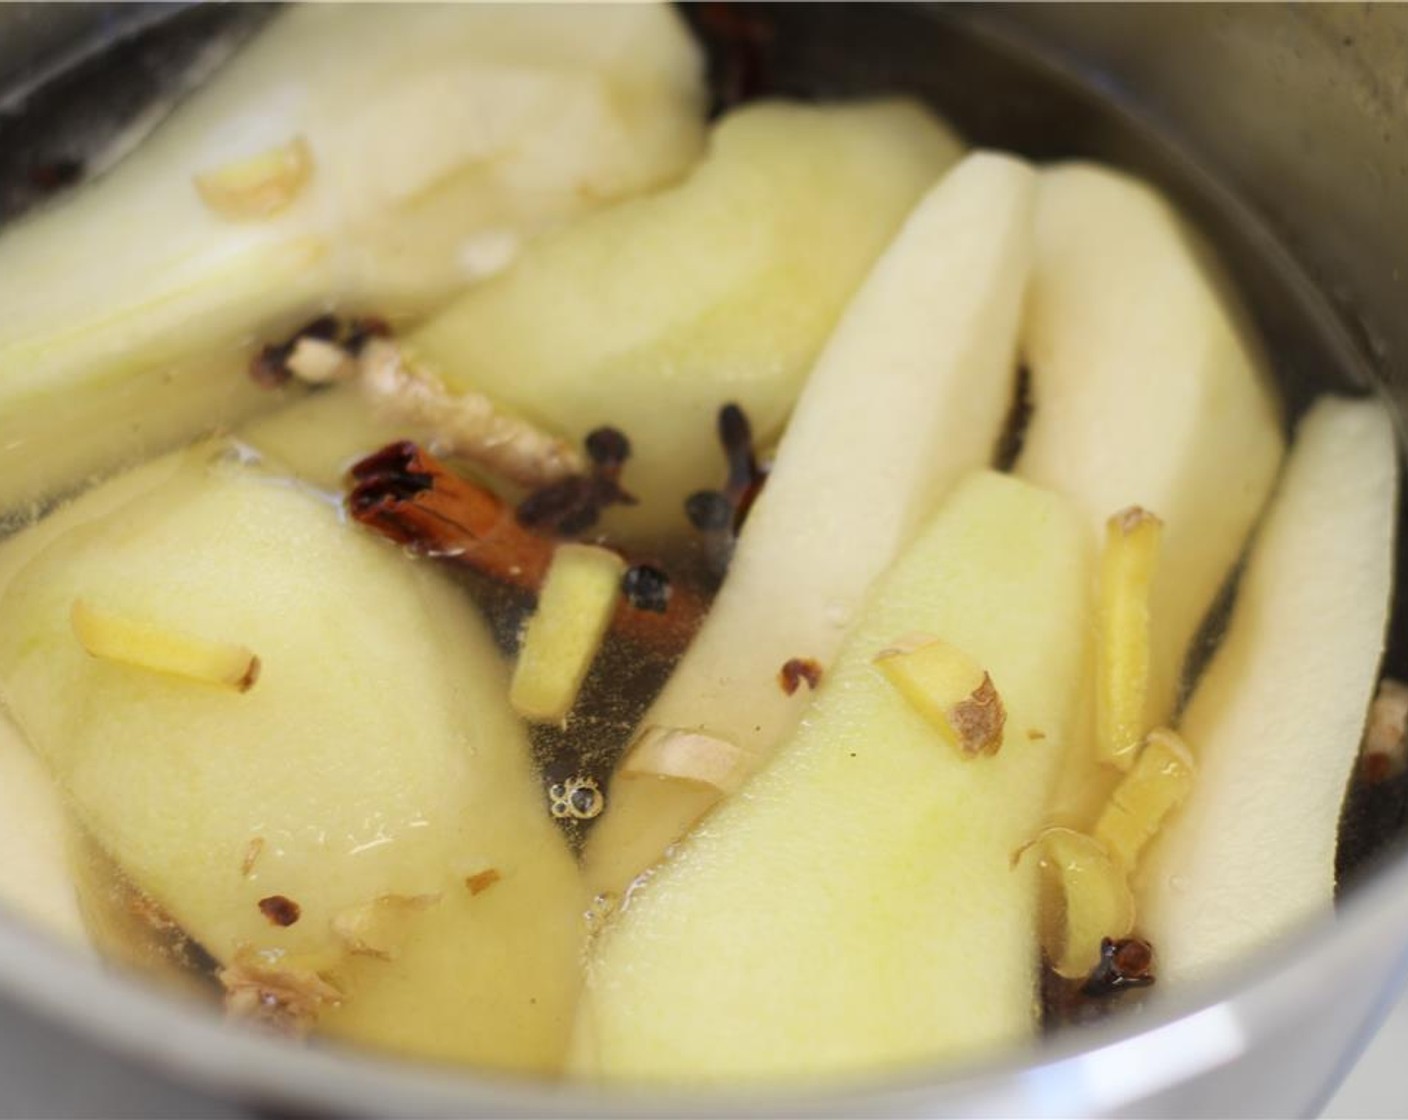 step 3 When syrup is boiling, add pears. Reduce heat and let simmer for 15-20 minutes or until pears are soft when run through with a knife.